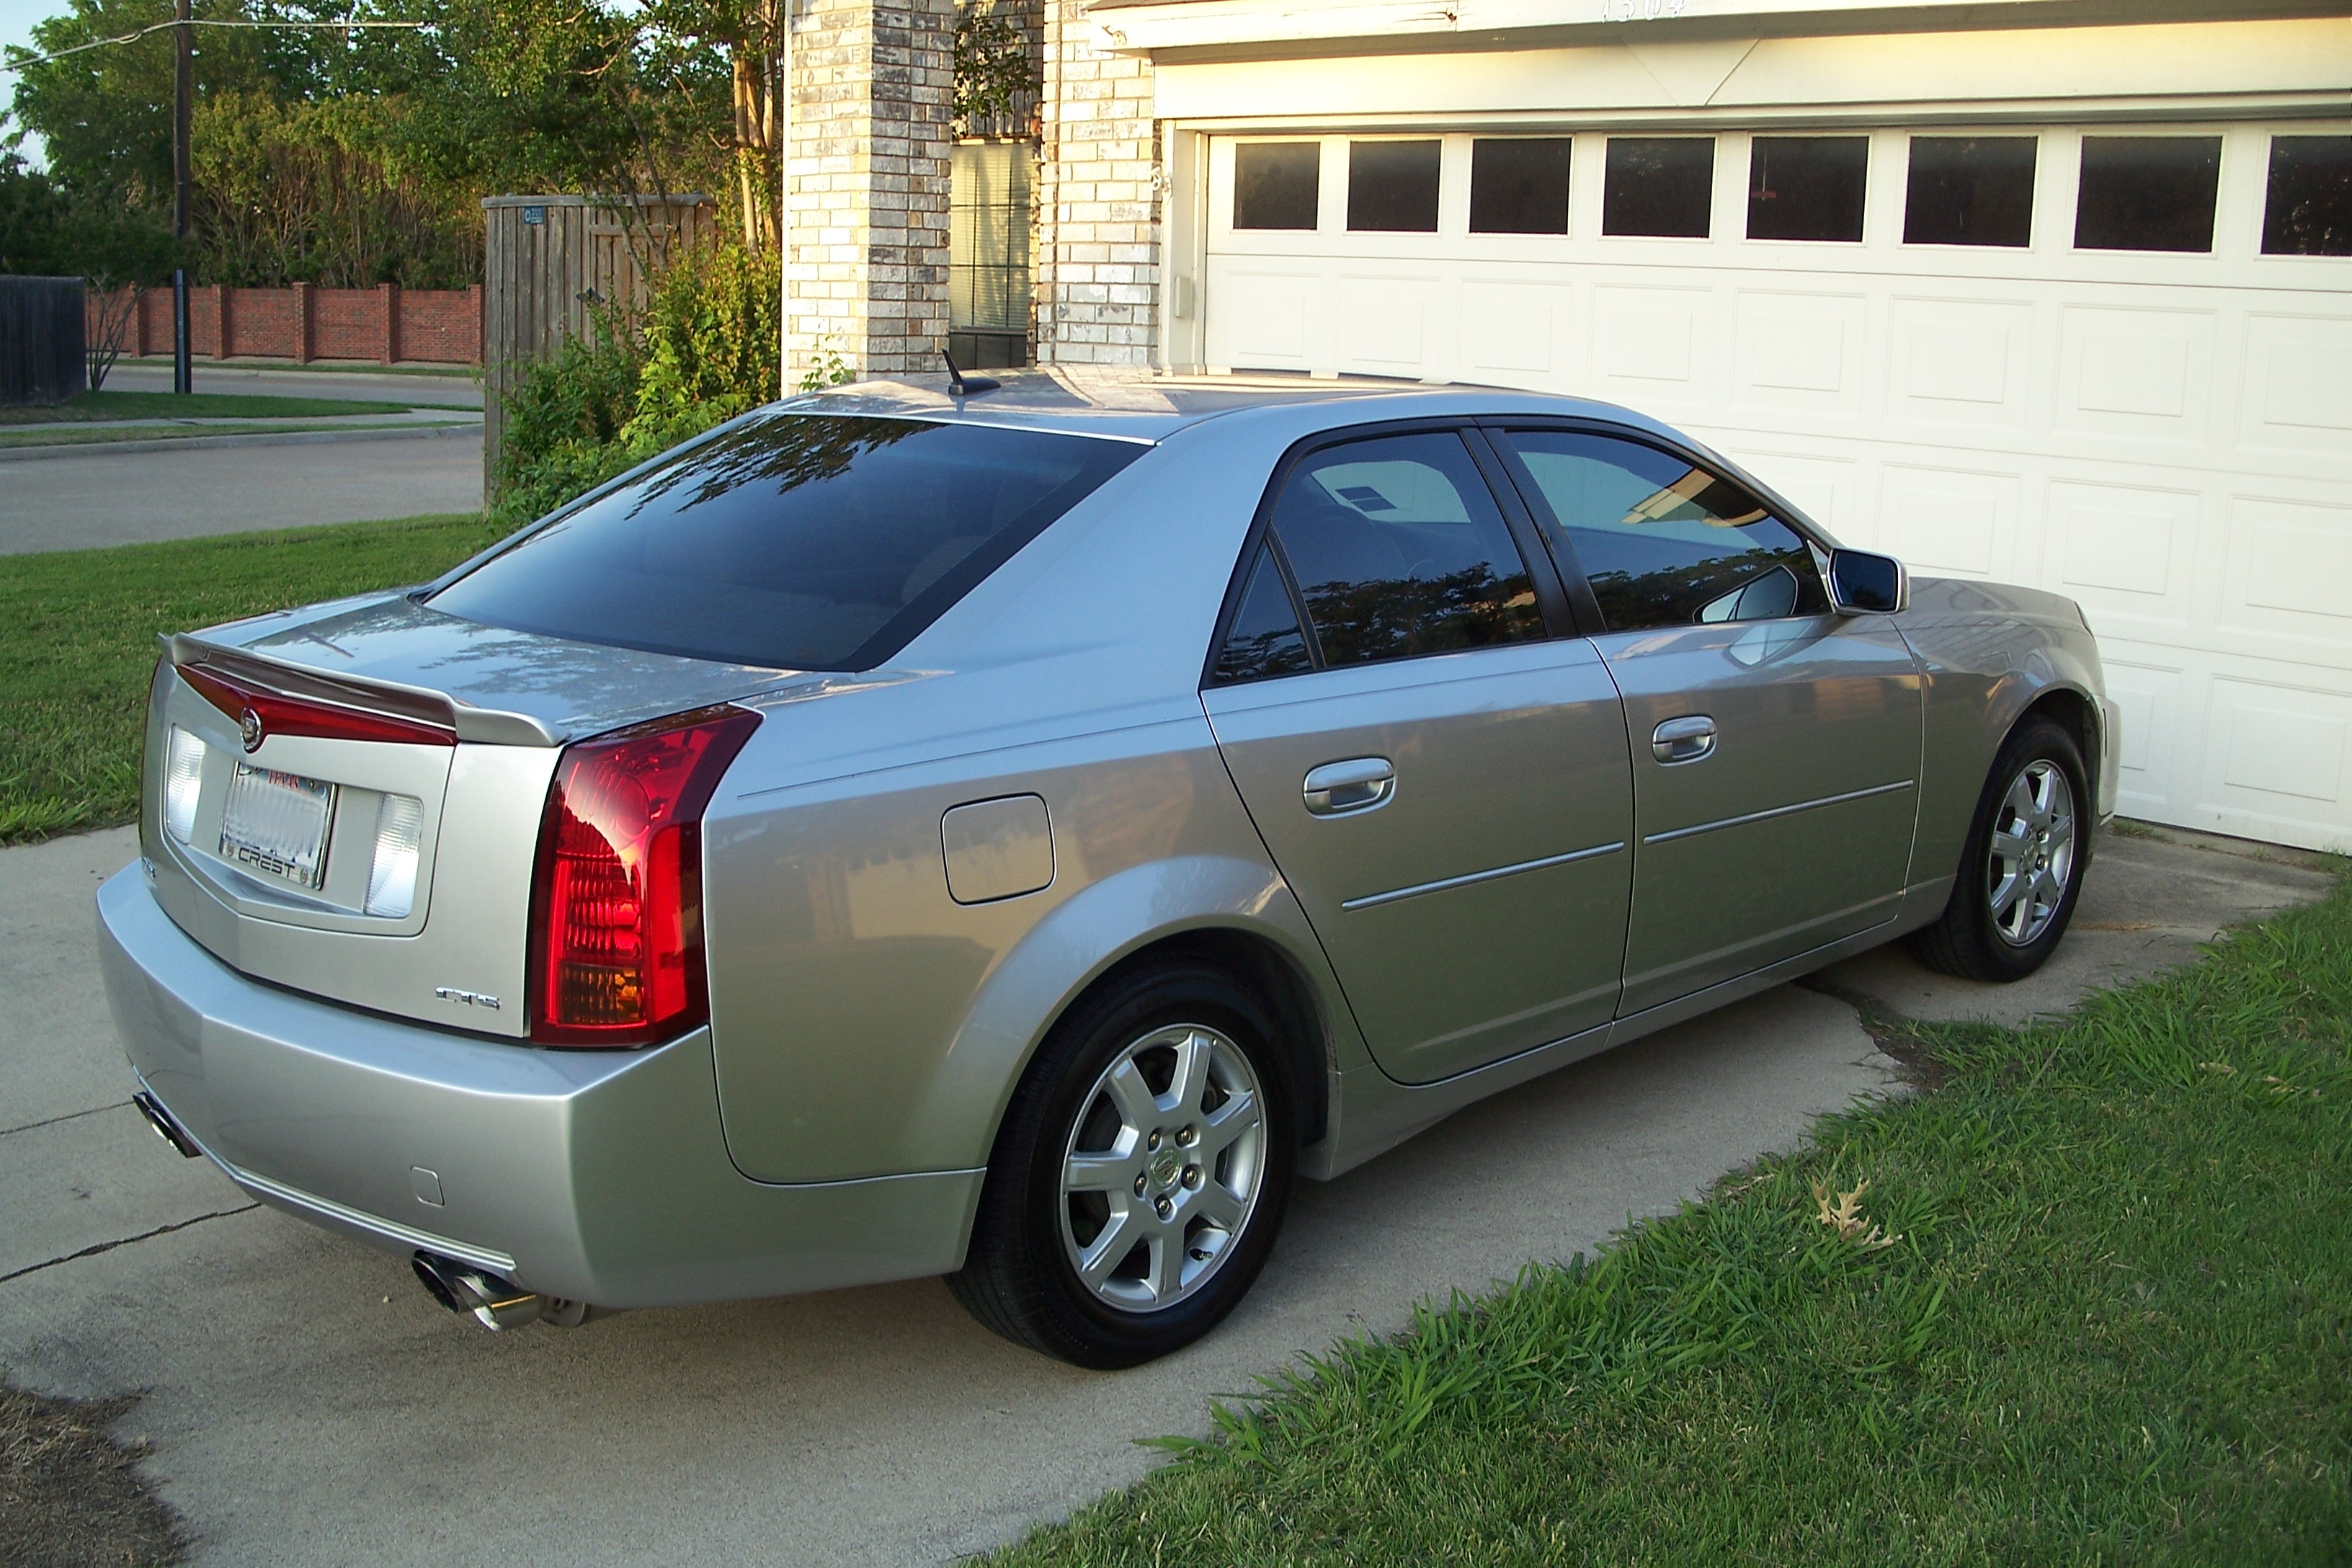 Sold 2005 Cadillac CTS 3.6L 86K Warranty 1Owner Leather CaddyInfo